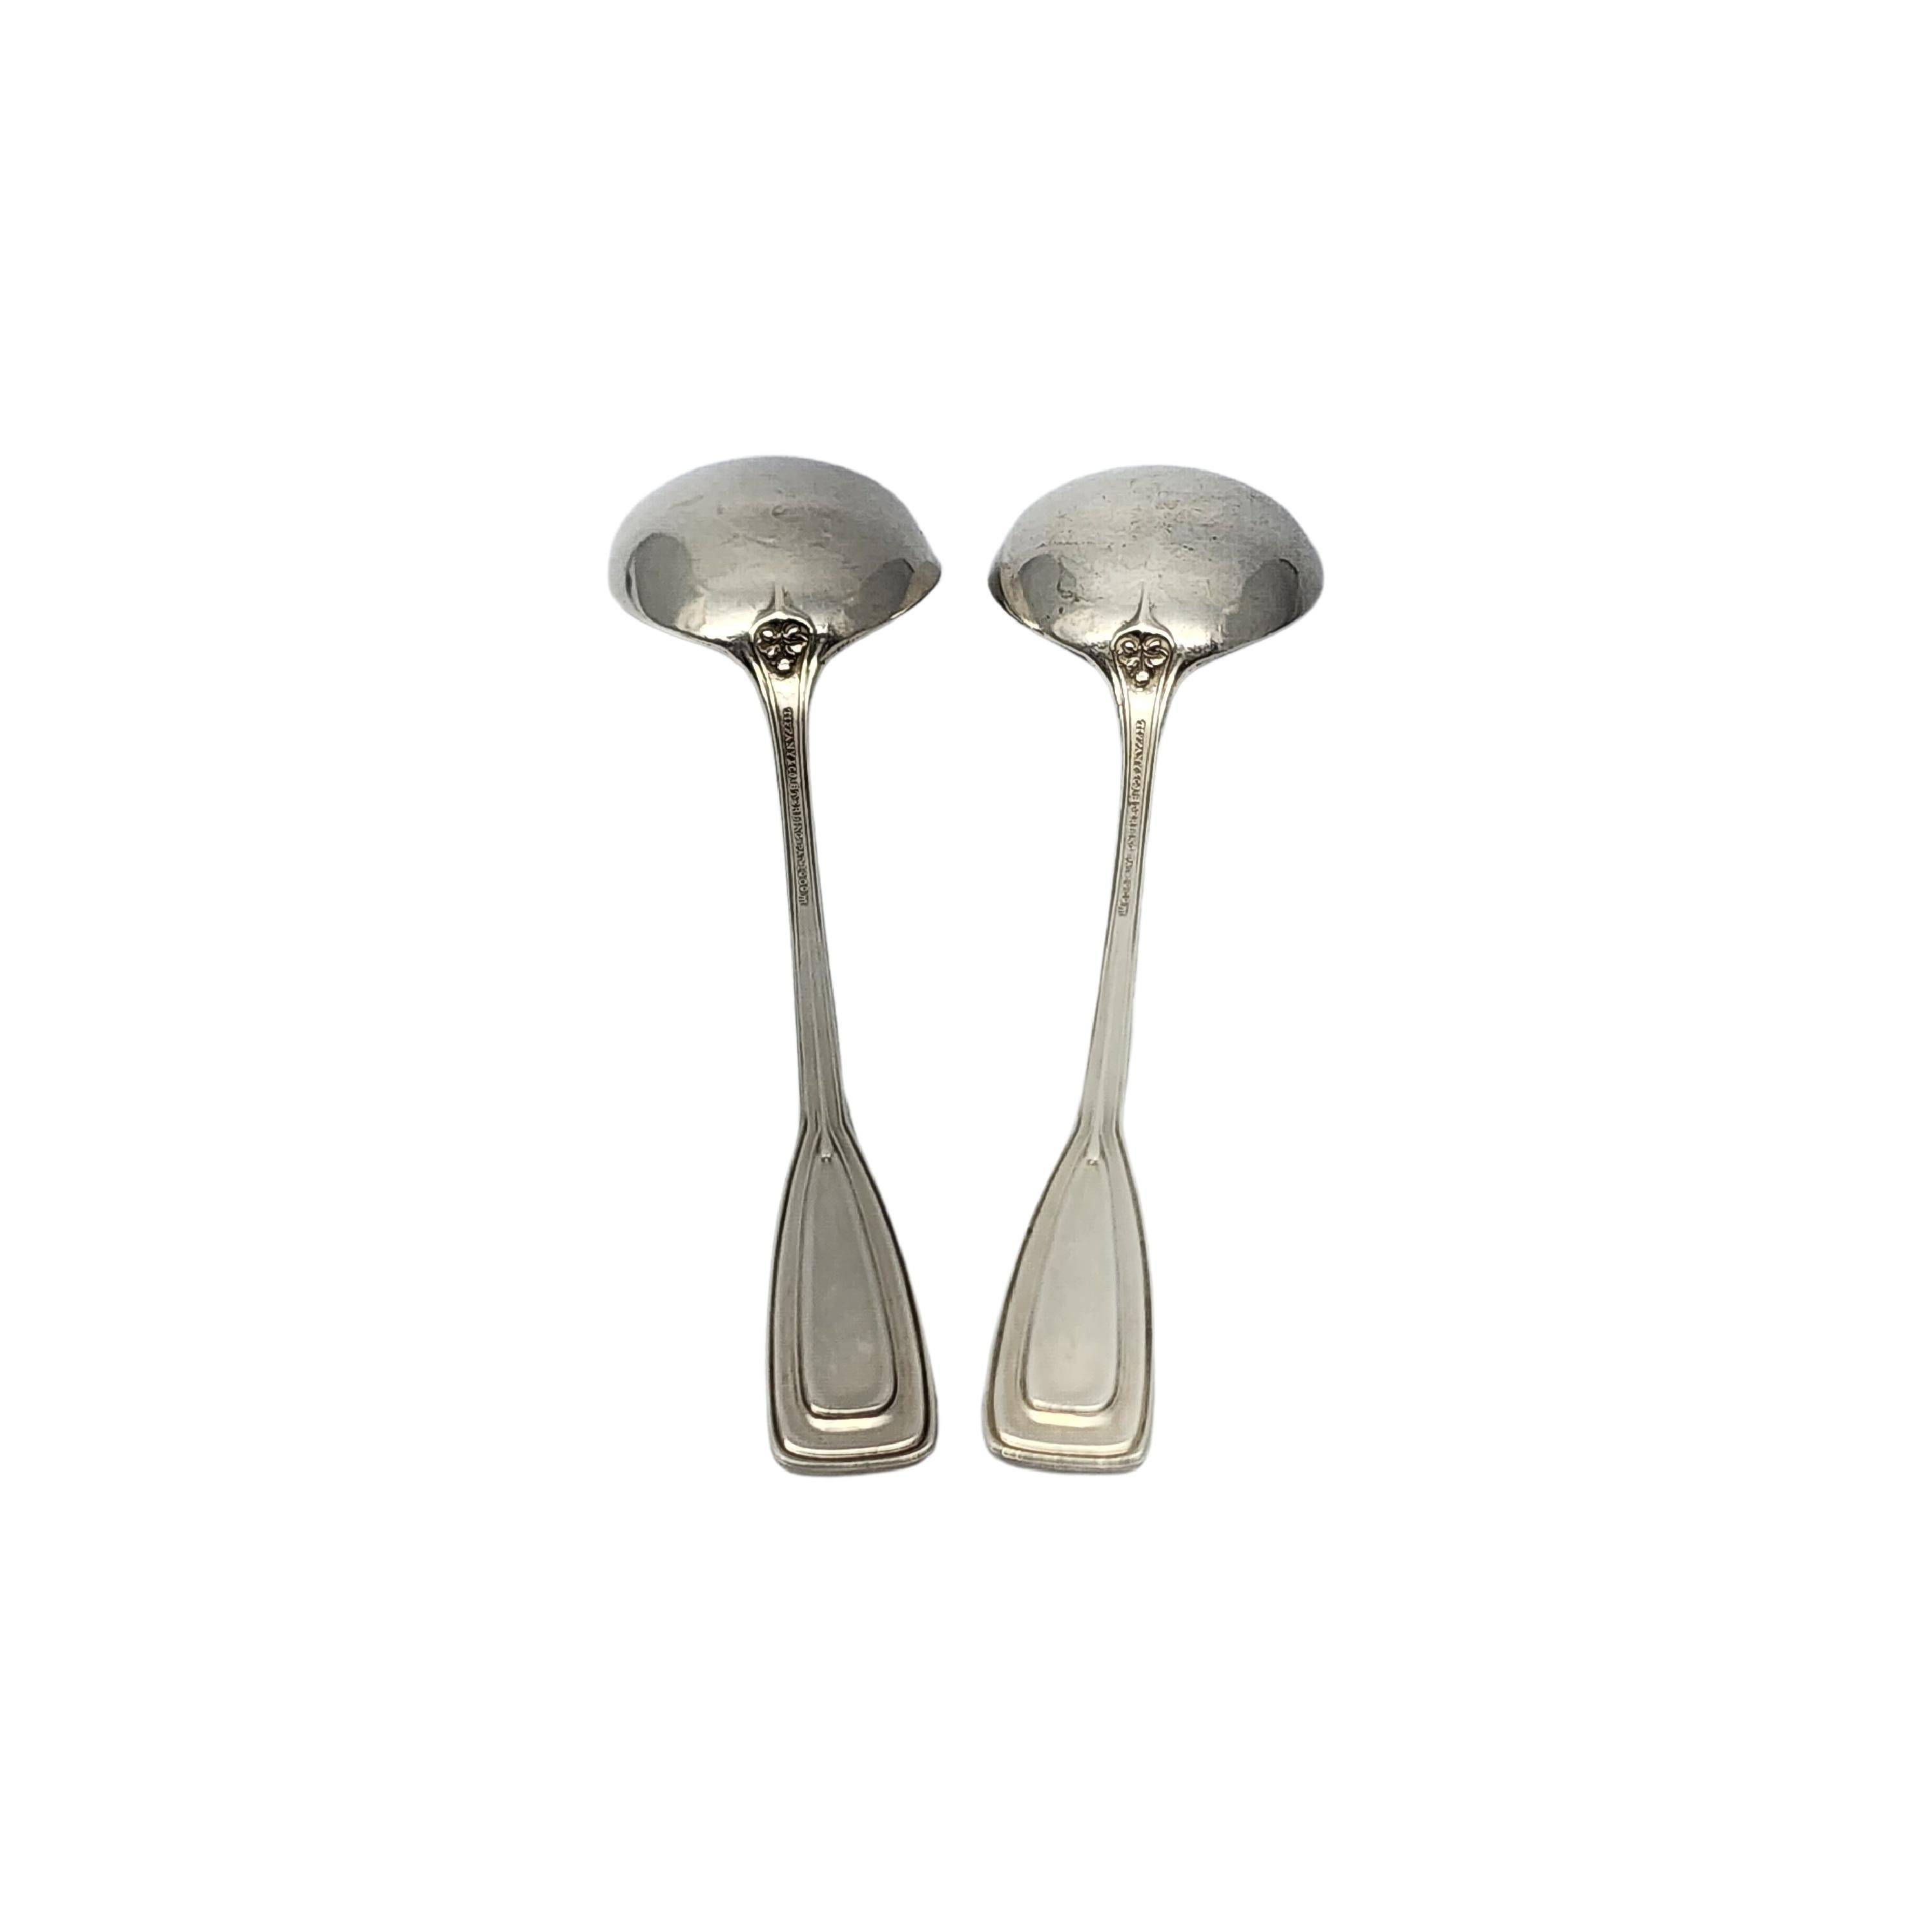 Set of 2 sterling silver round bowl bouillon soup spoons by Tiffany & Co in the St. Dunstan pattern.

No monogram.

Designed by Albert A. Southwick in 1909 and named for the patron saint of gold and silversmiths, Tiffany's St. Dunstan pattern is a